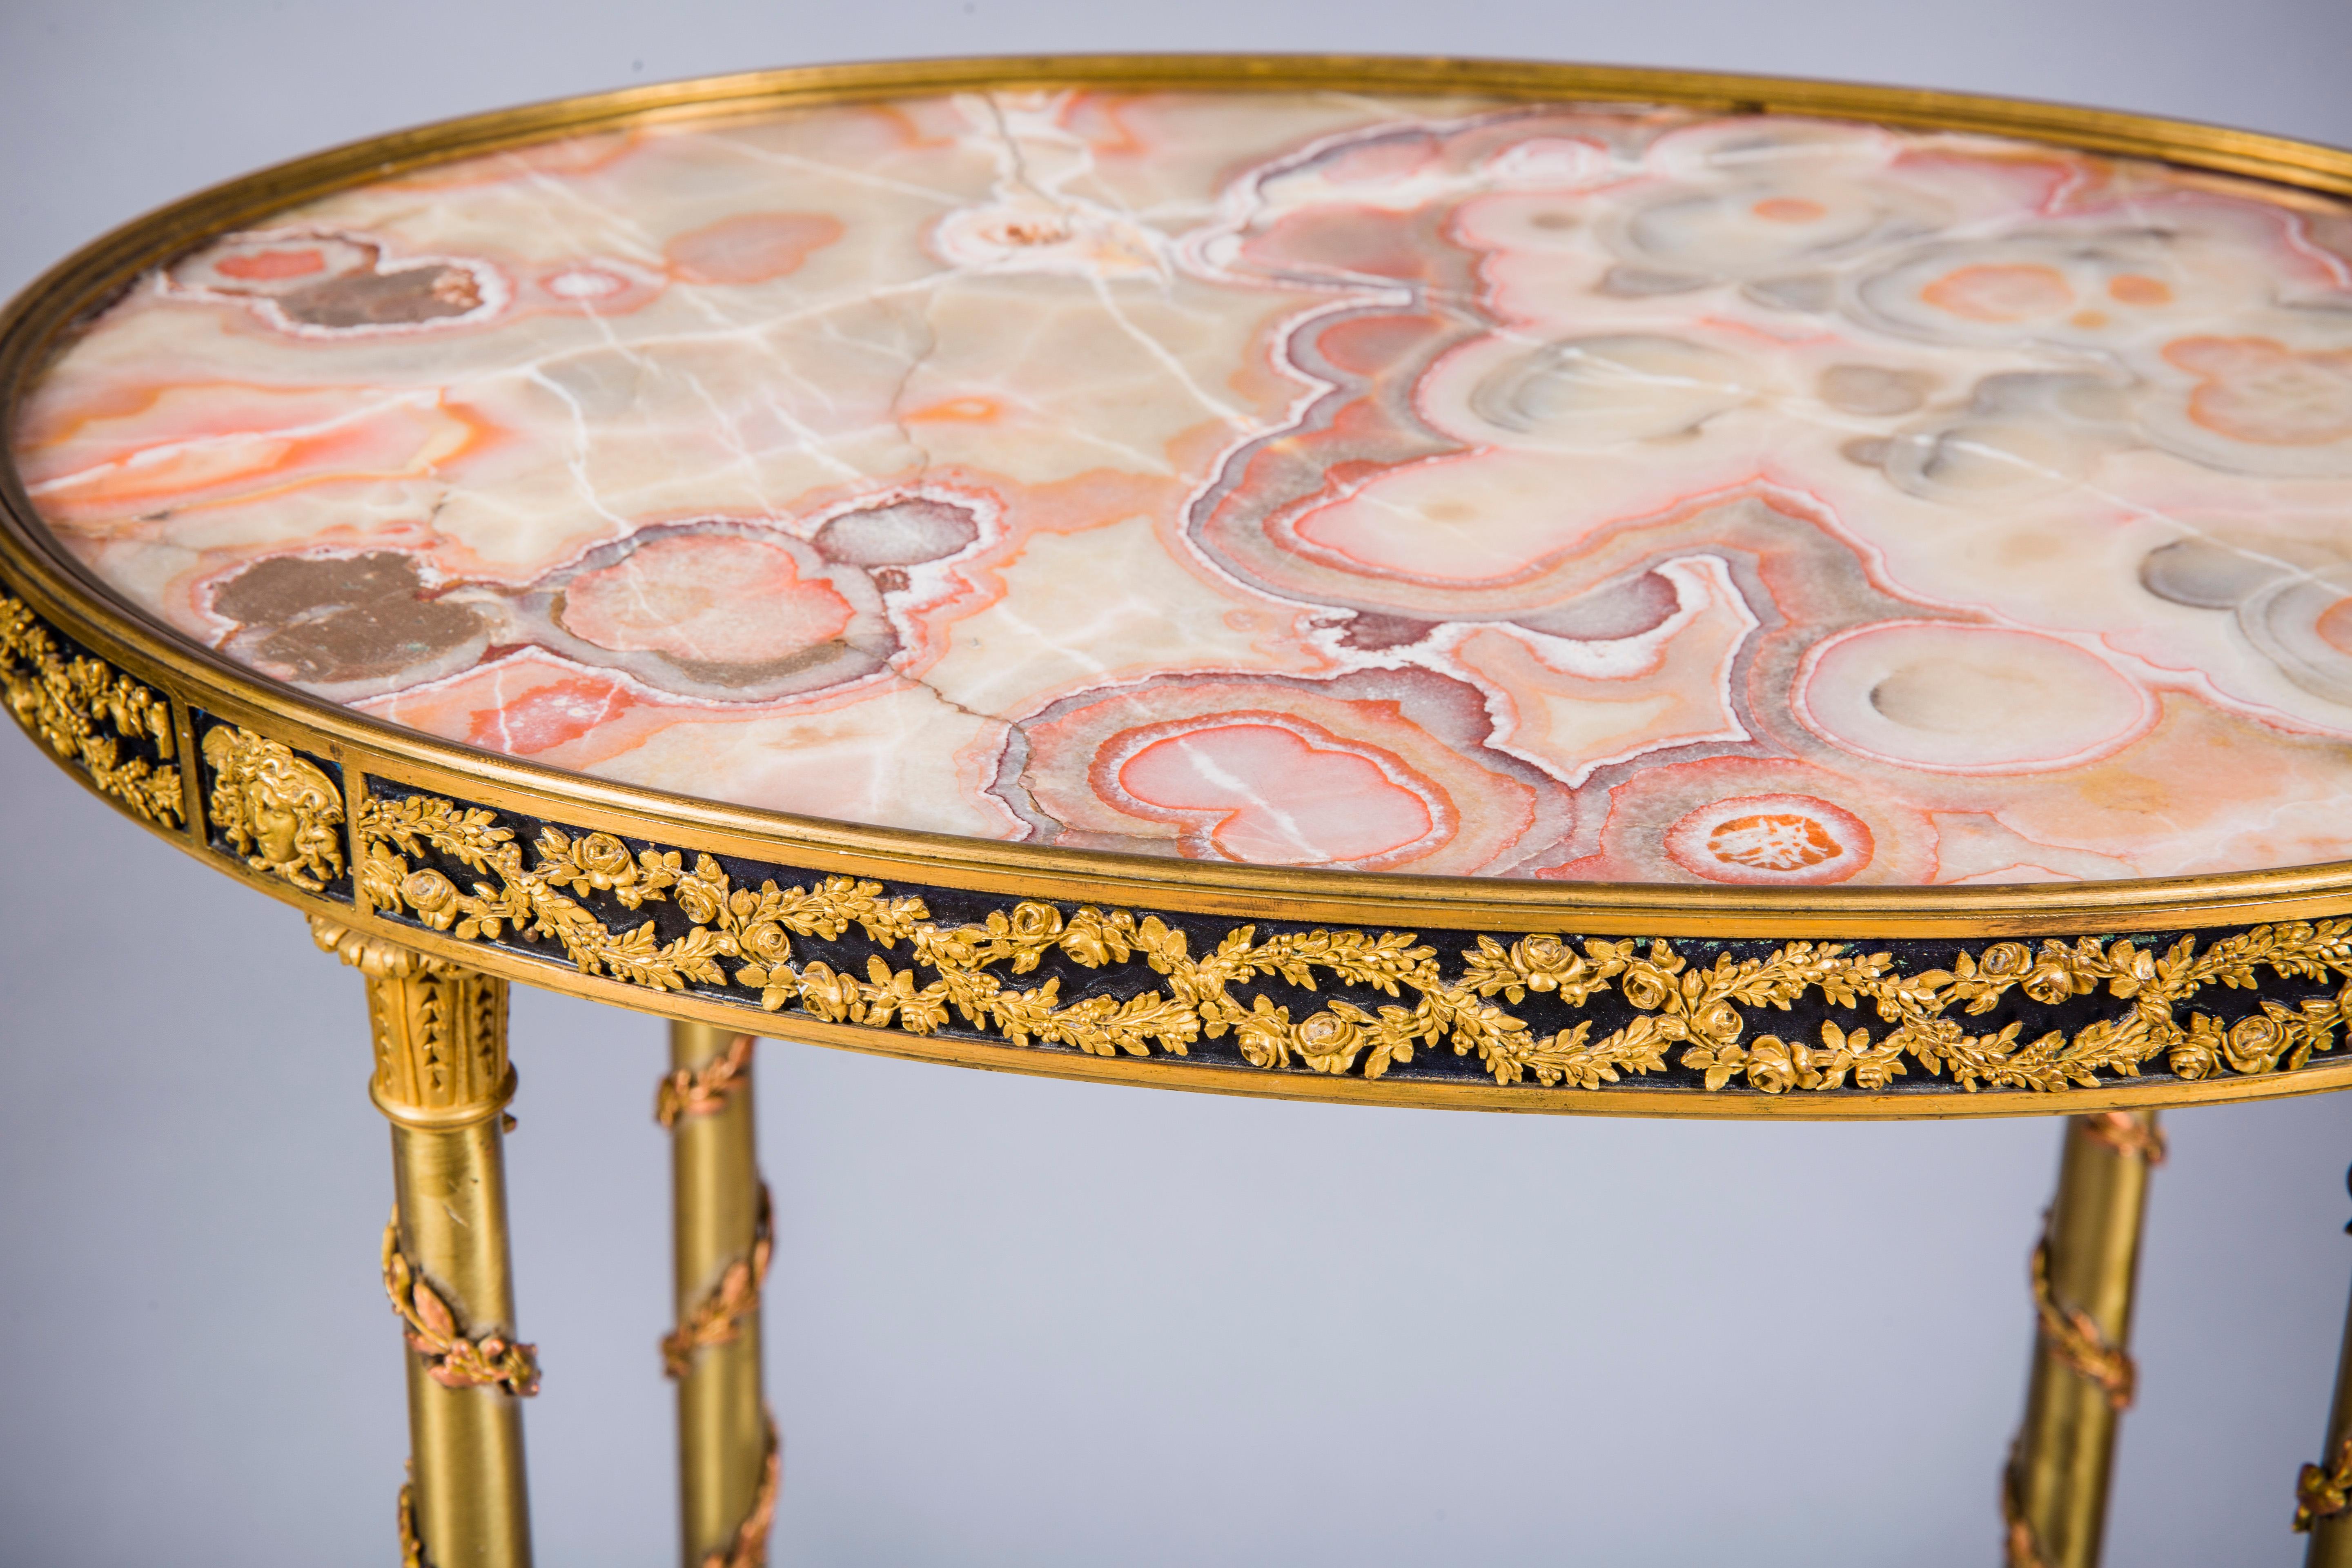 A French gilt bronze guéridon side table
Applied ormolu bronze wreath with medusa bordering along the oval-shaped frame with inset hardstone top above a set of four intricately chiseled gilt ormolu legs decorated by foliate ormolu spirals joined by